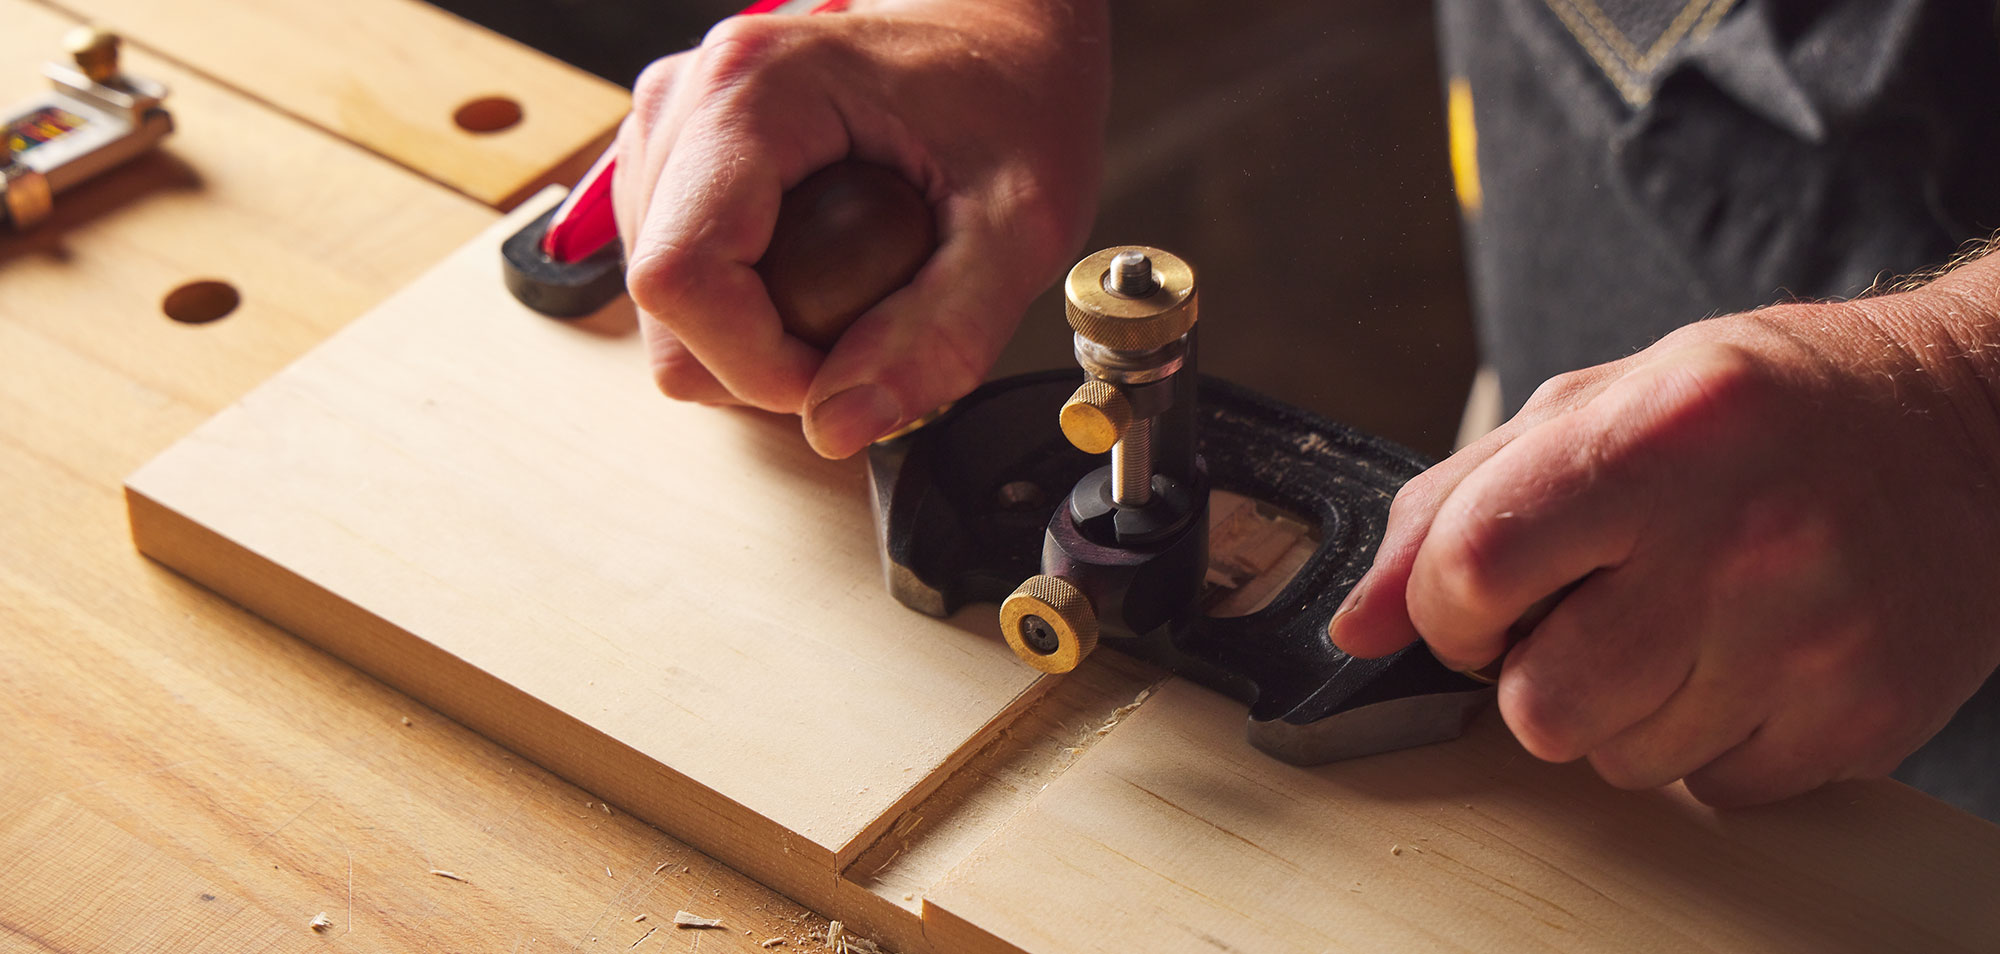 Cutting a dado with a router plane